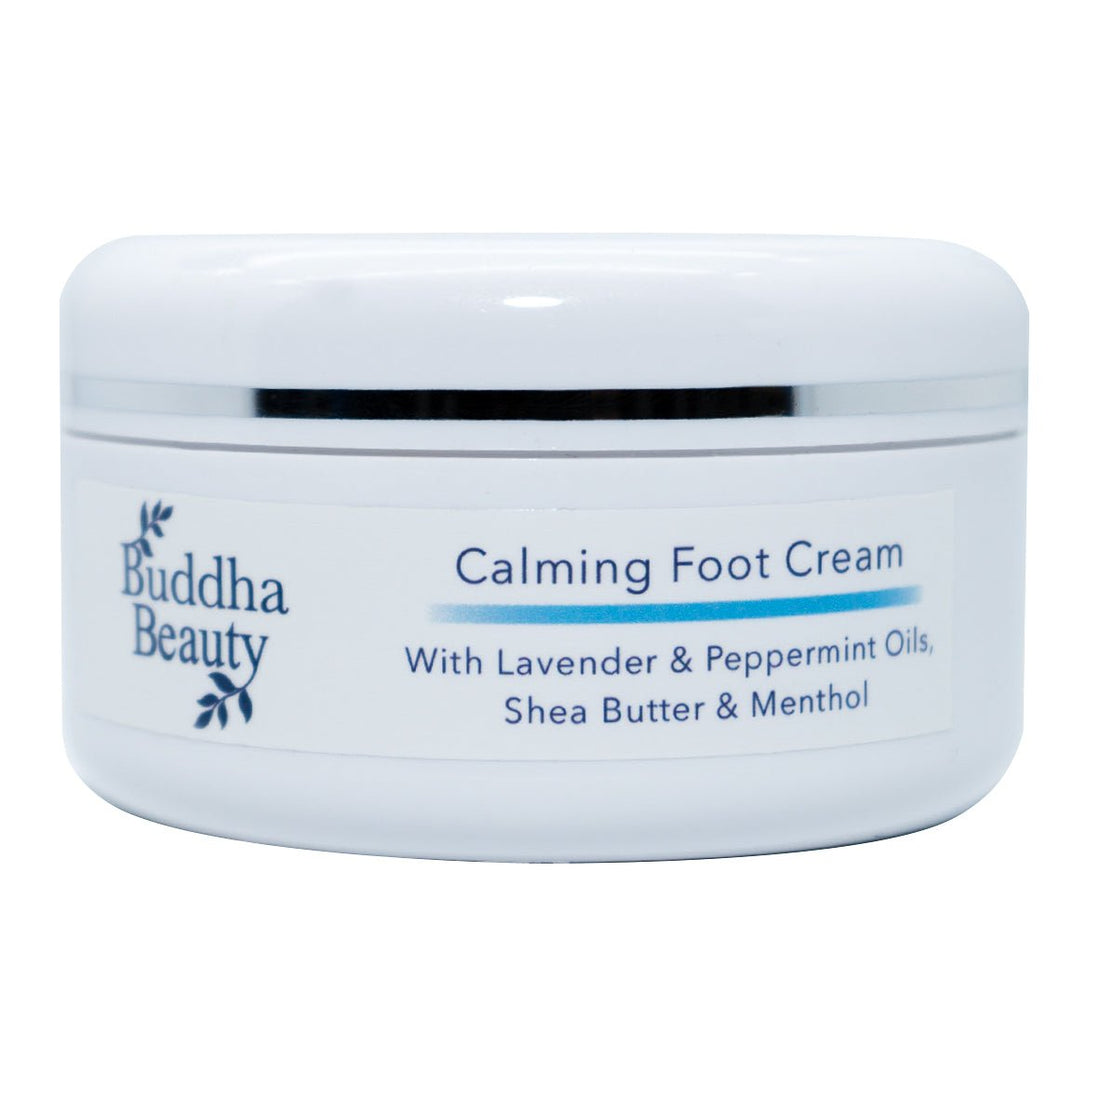 Uses and Benefits of Foot cream - Buddha Beauty Skincare